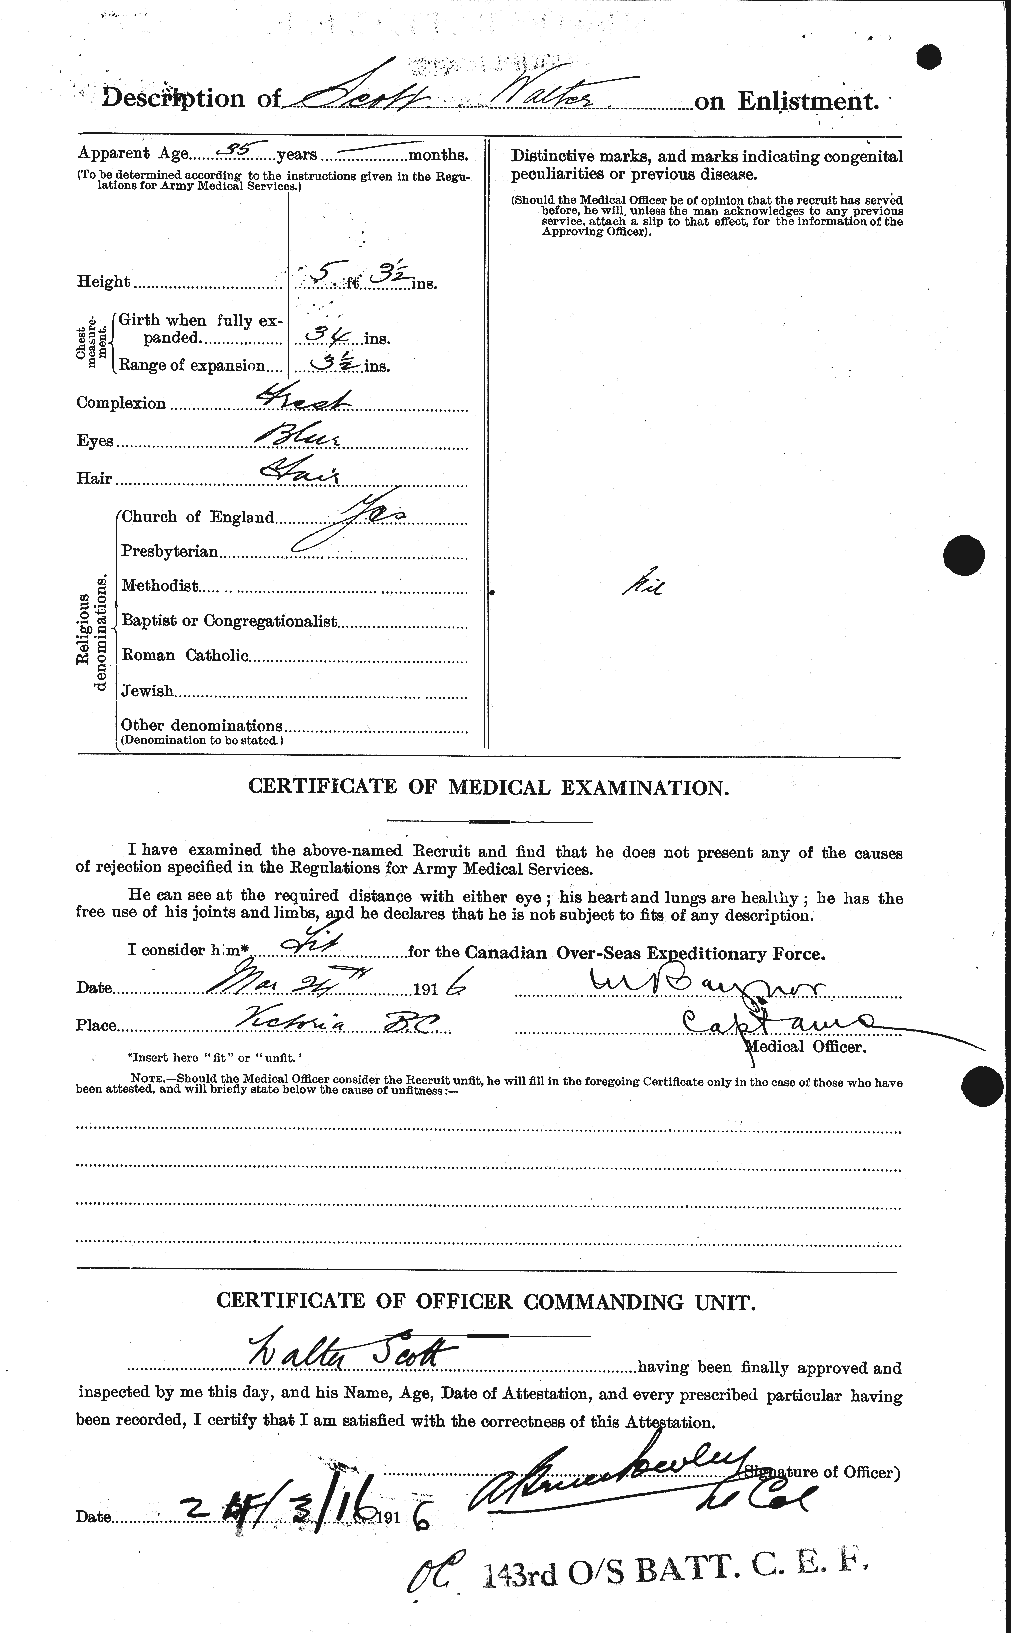 Personnel Records of the First World War - CEF 088019b